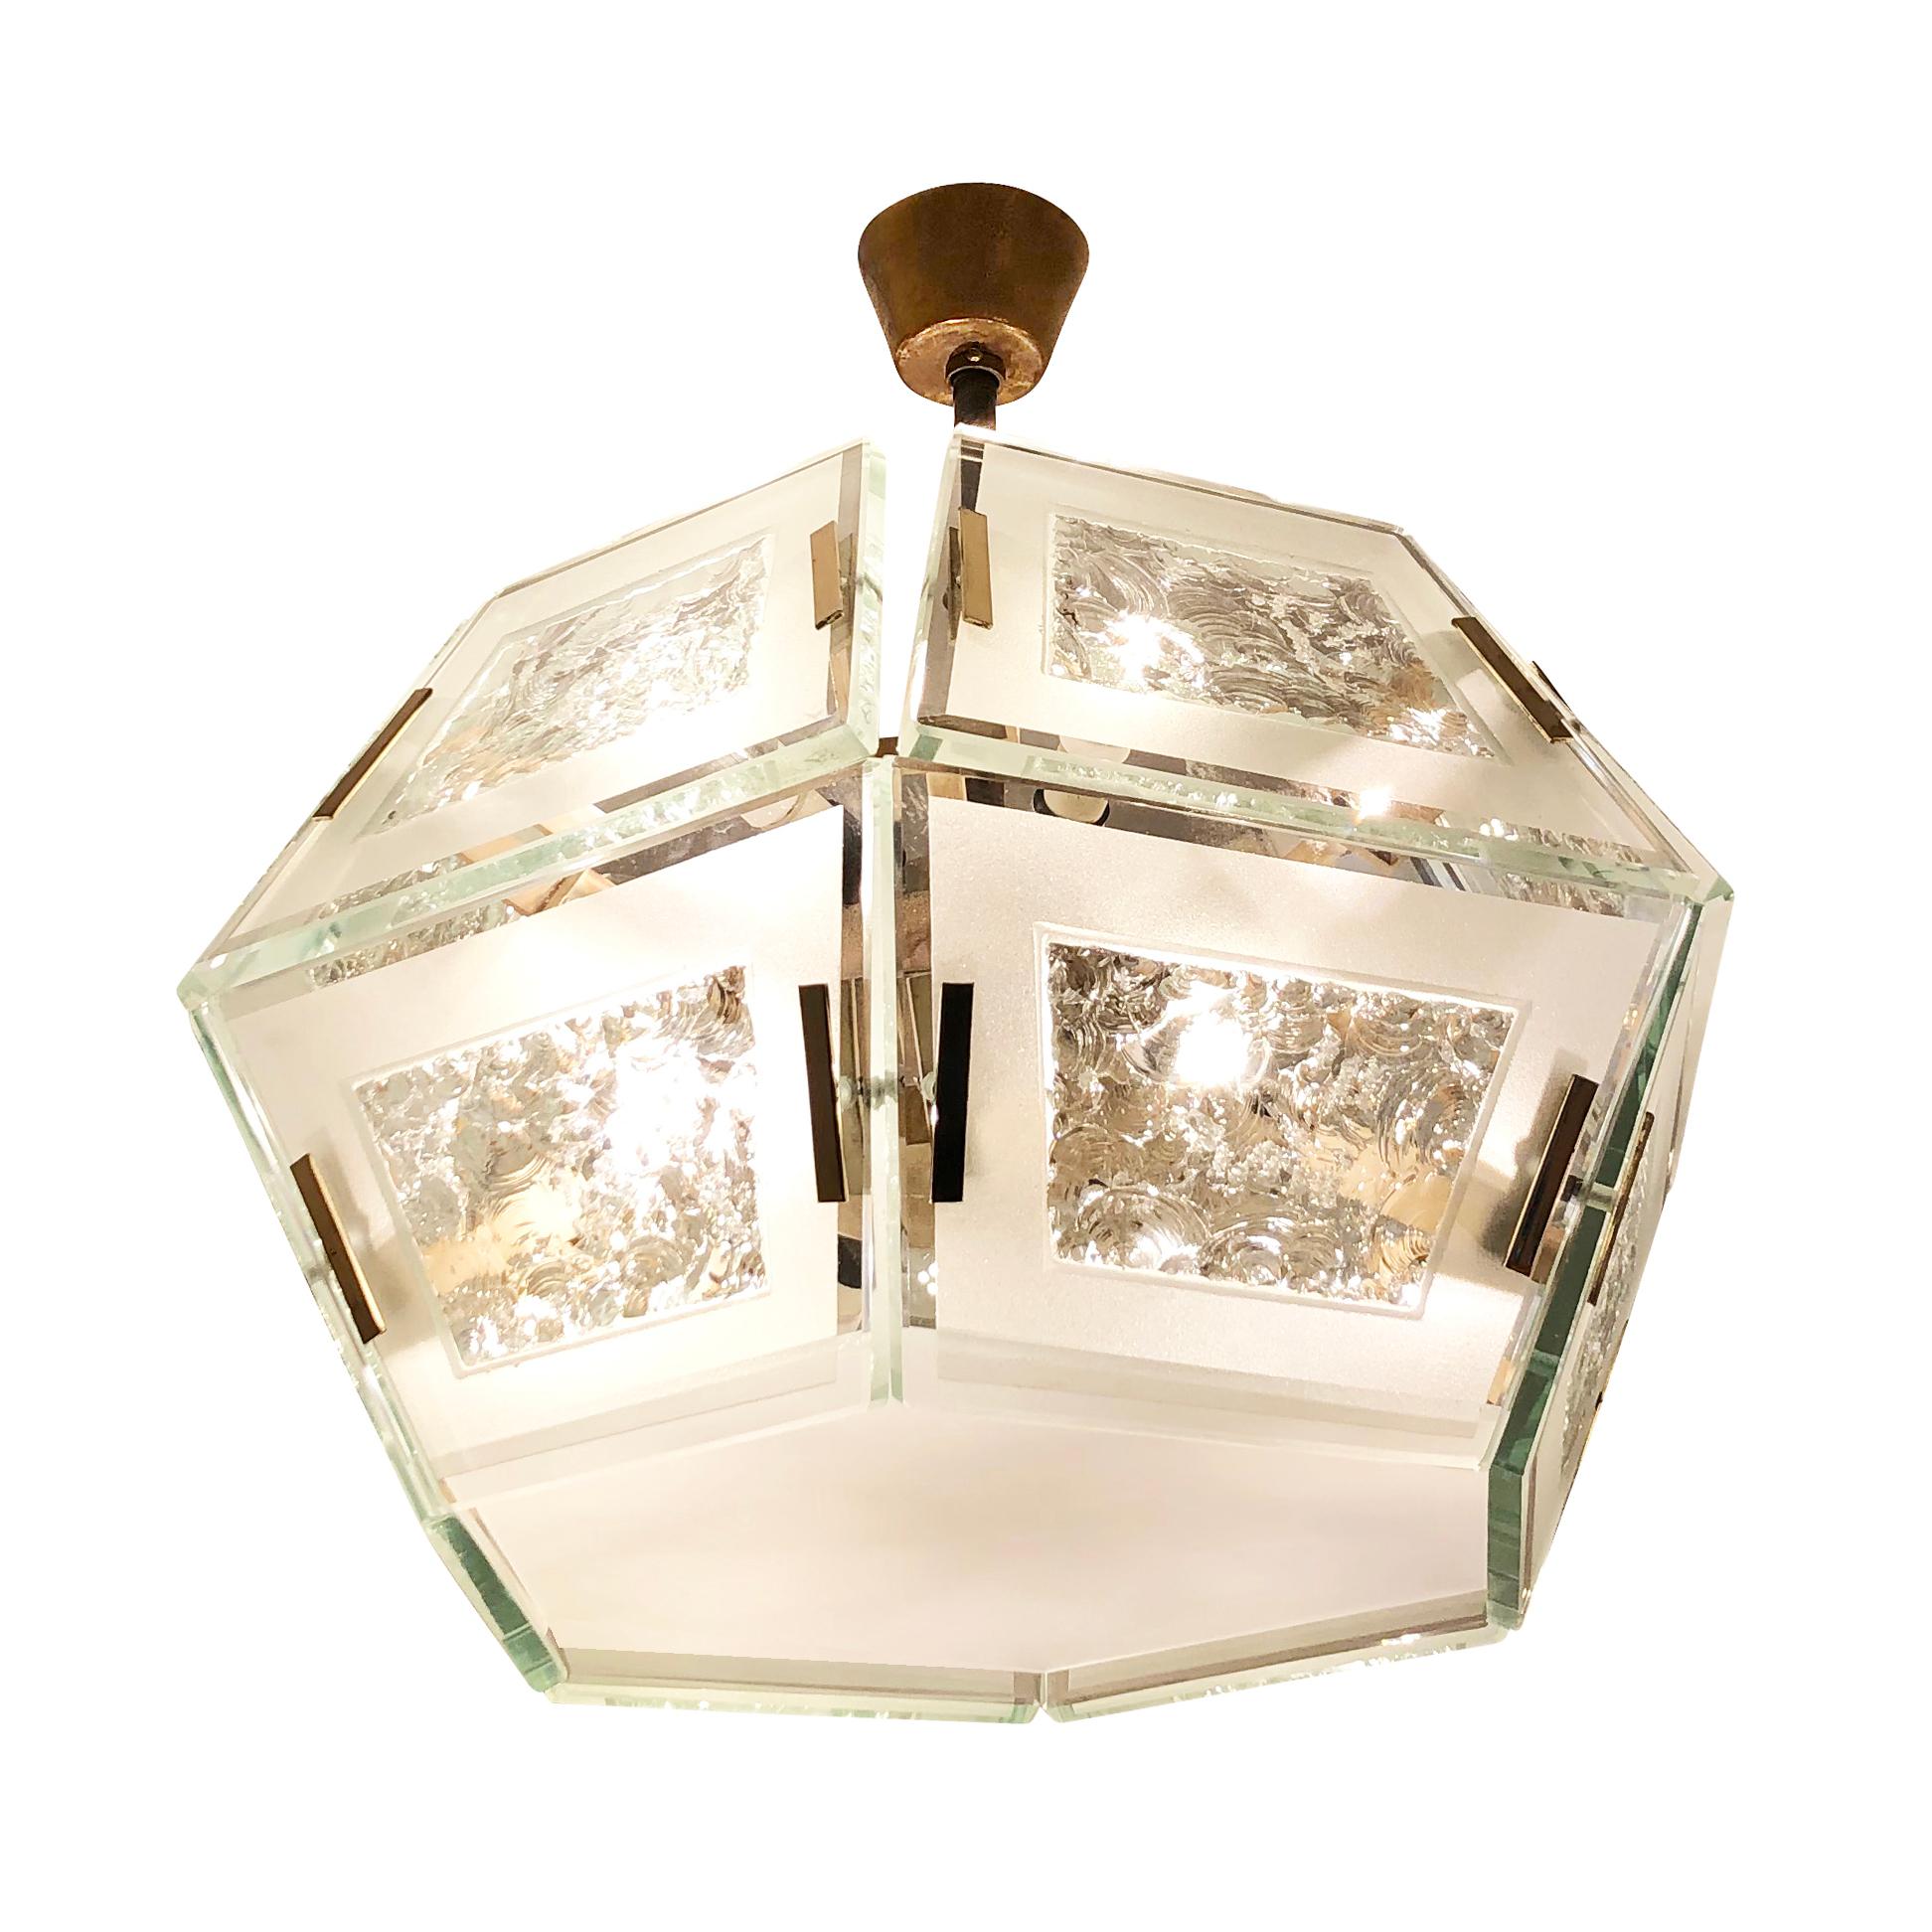 Rare Fontana Arte chandelier model 2362 designed by Max Ingrand in the 1960s. Its hexagonal form is composed of twelve frosted glass tiles with hand chiseled centers. Brass details and fasteners and holds twelve candelabra bulbs.

Condition: